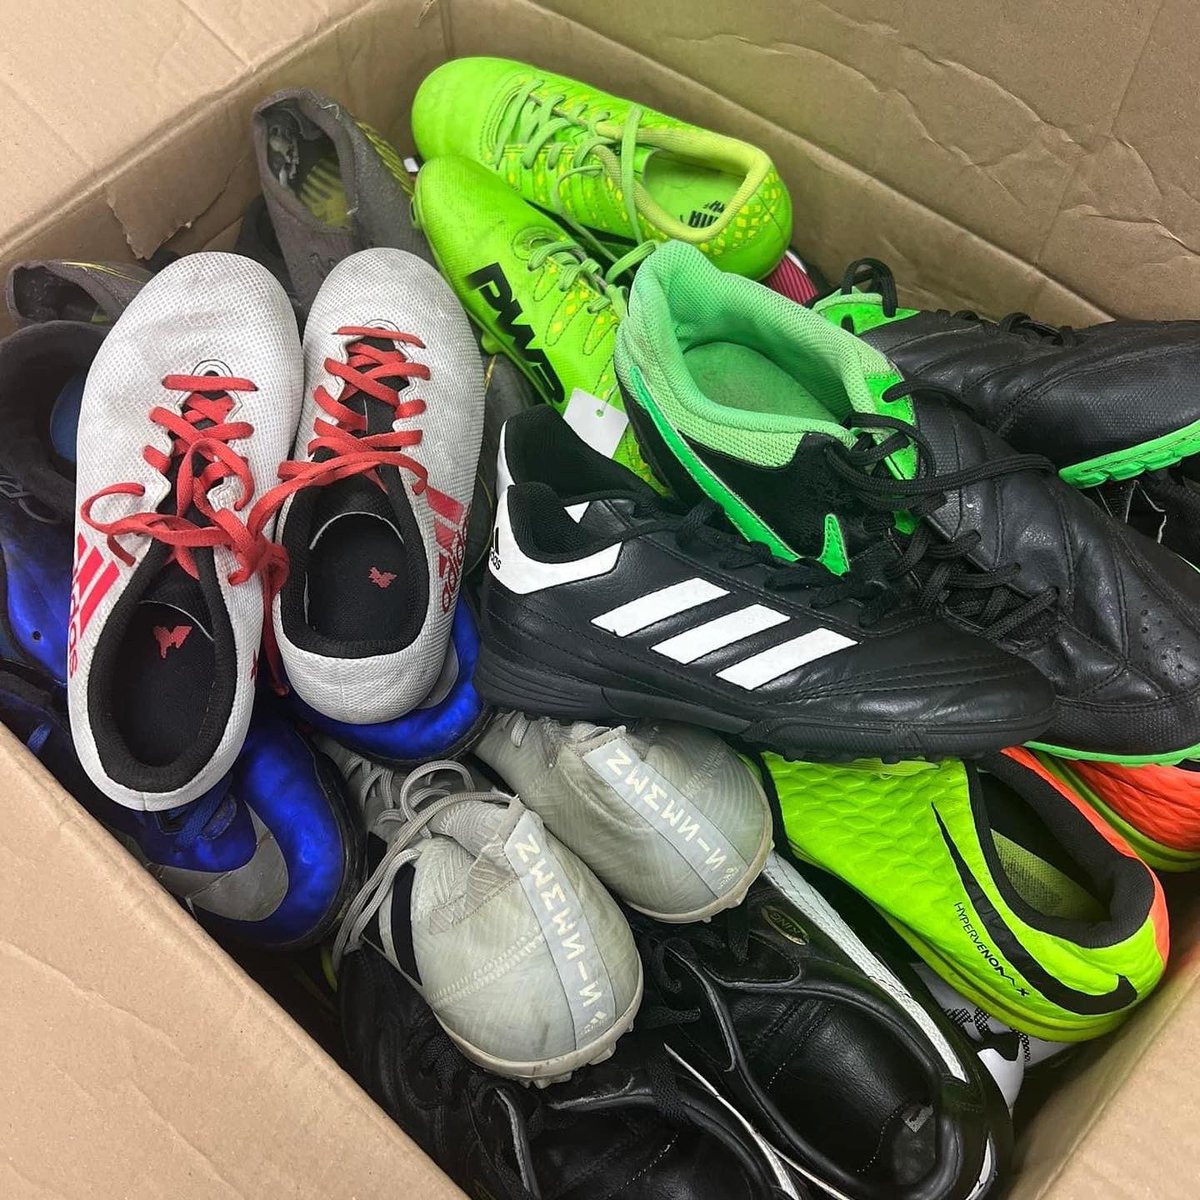 Our partner @nu_foundation has been on the road delivering boots to Hadrian Park Primary School and St Teresa’s Catholic Primary School in the North East! 👟 Carrick’s Boot Room has now delivered more than 3️⃣0️⃣0️⃣0️⃣ pairs of boots to young people and we still have more to go! ⭐️